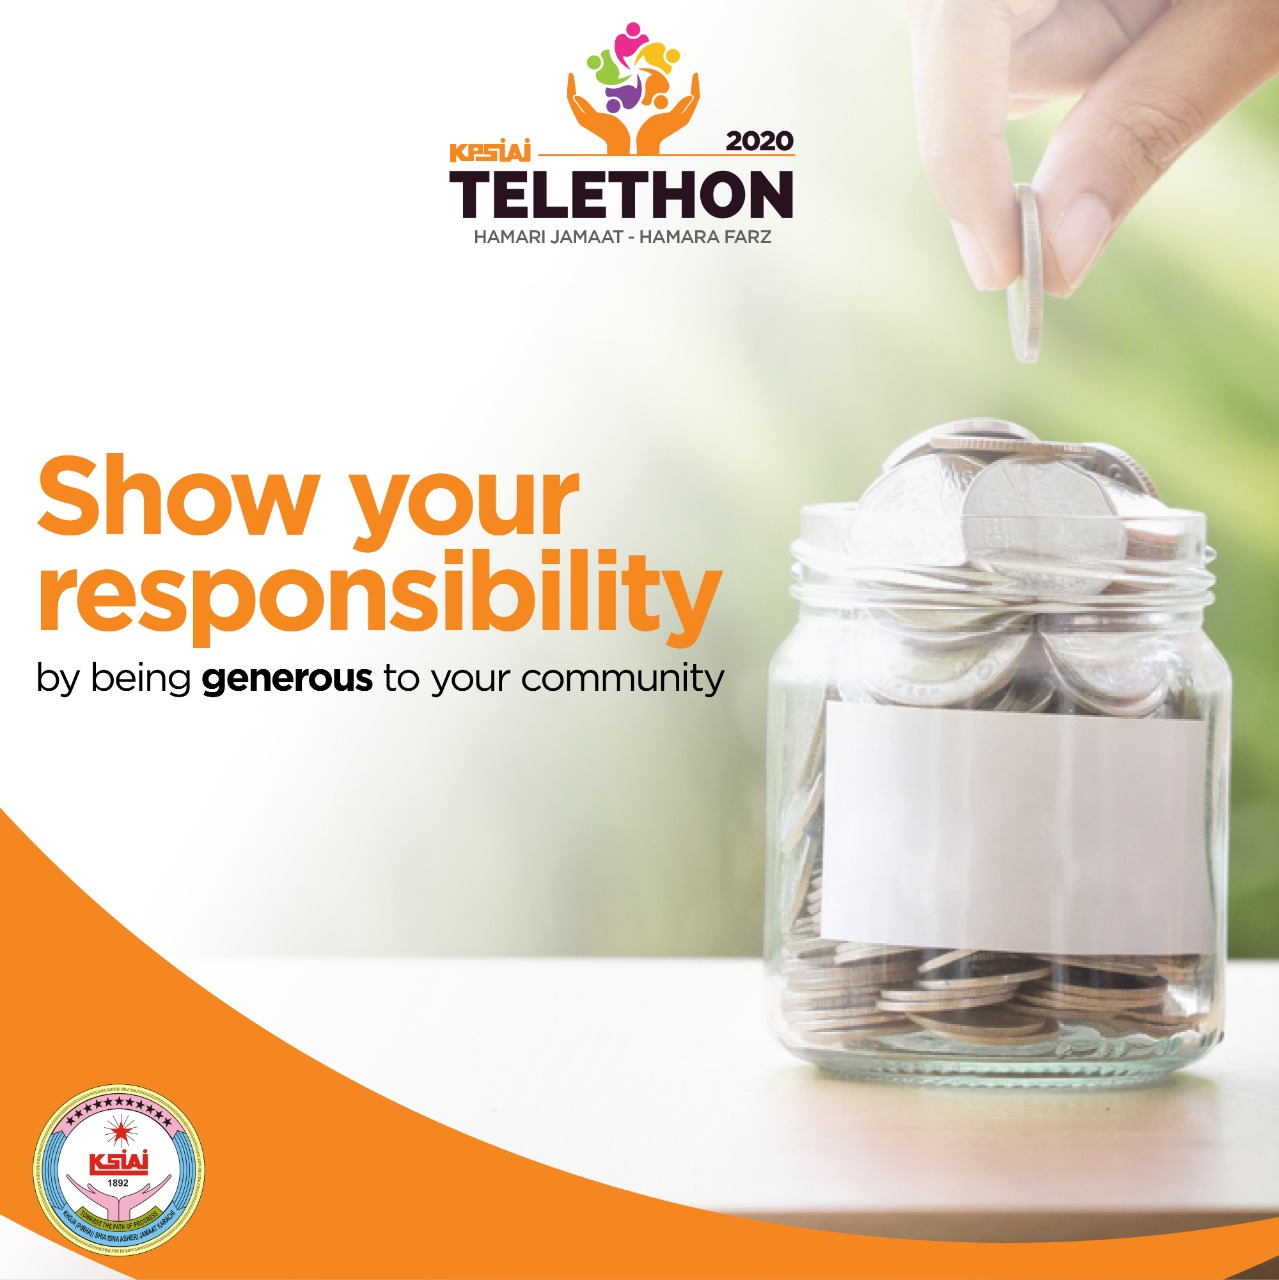 Every act of generosity can make a difference in someone’s life. Play your part in contributing to the wellness of the less privileged of the society in the fundraising Telethon organized by KPSIAJ.